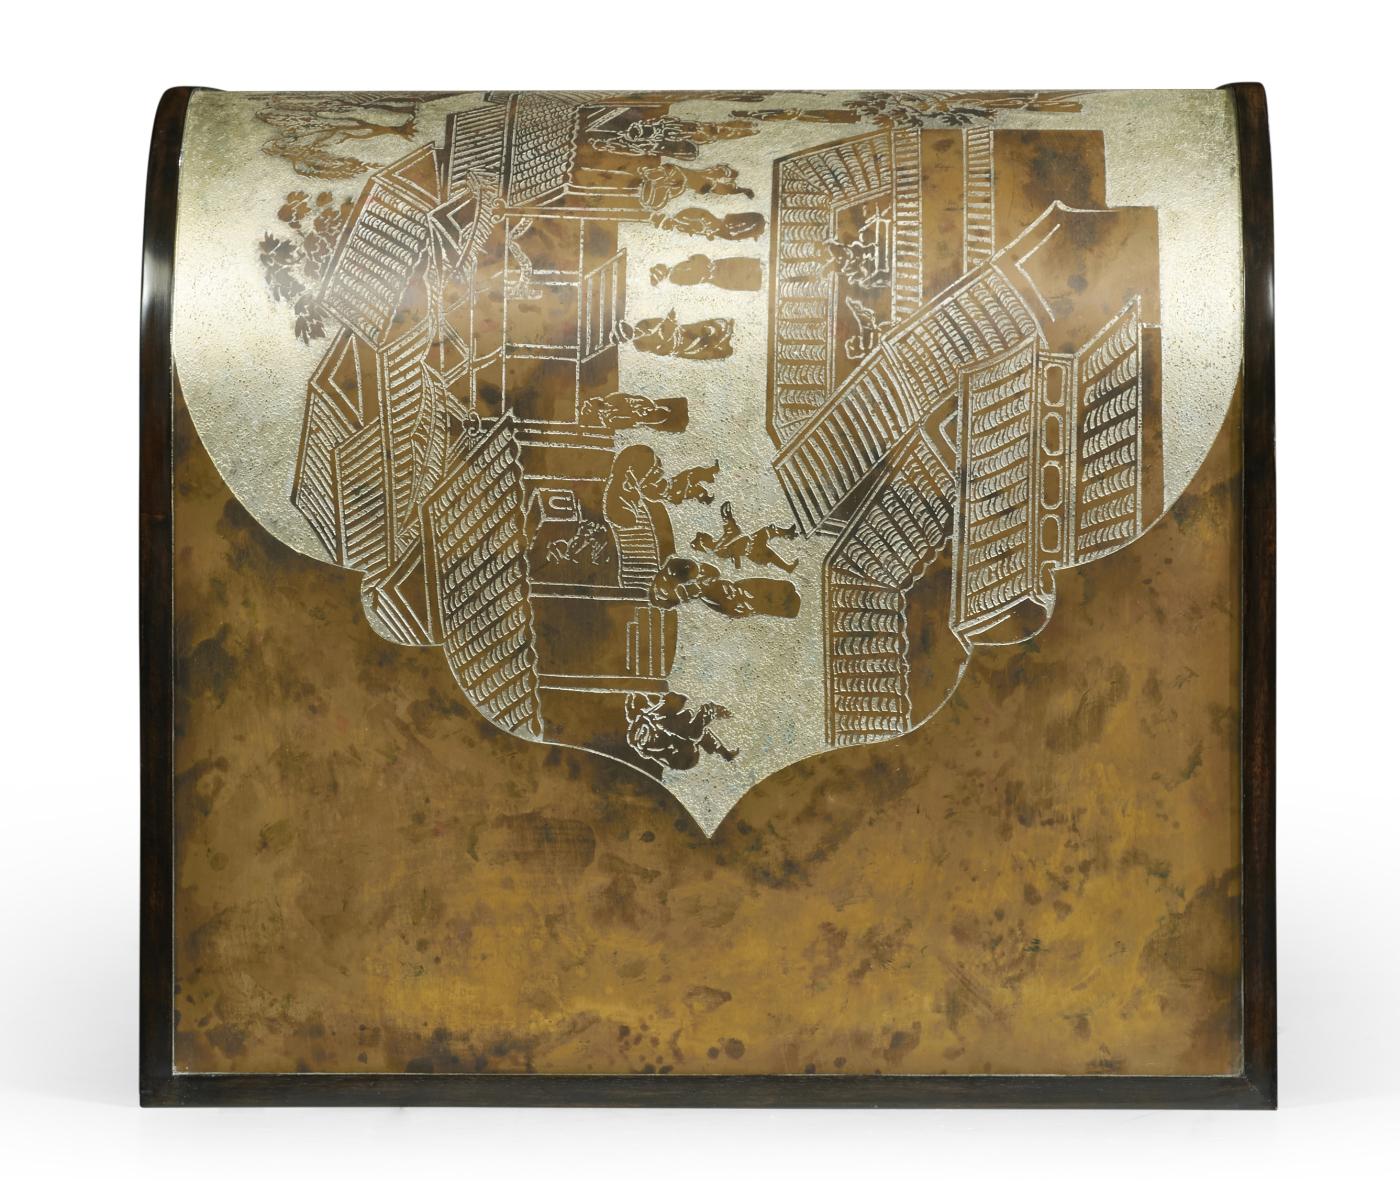 Midcentury style curved chinoiserie style antique etched brass and ebonized oak coffee table.
 
Inspired by the fantastic works of art of Philip and Kelvin LaVerne.

Dimensions: 48